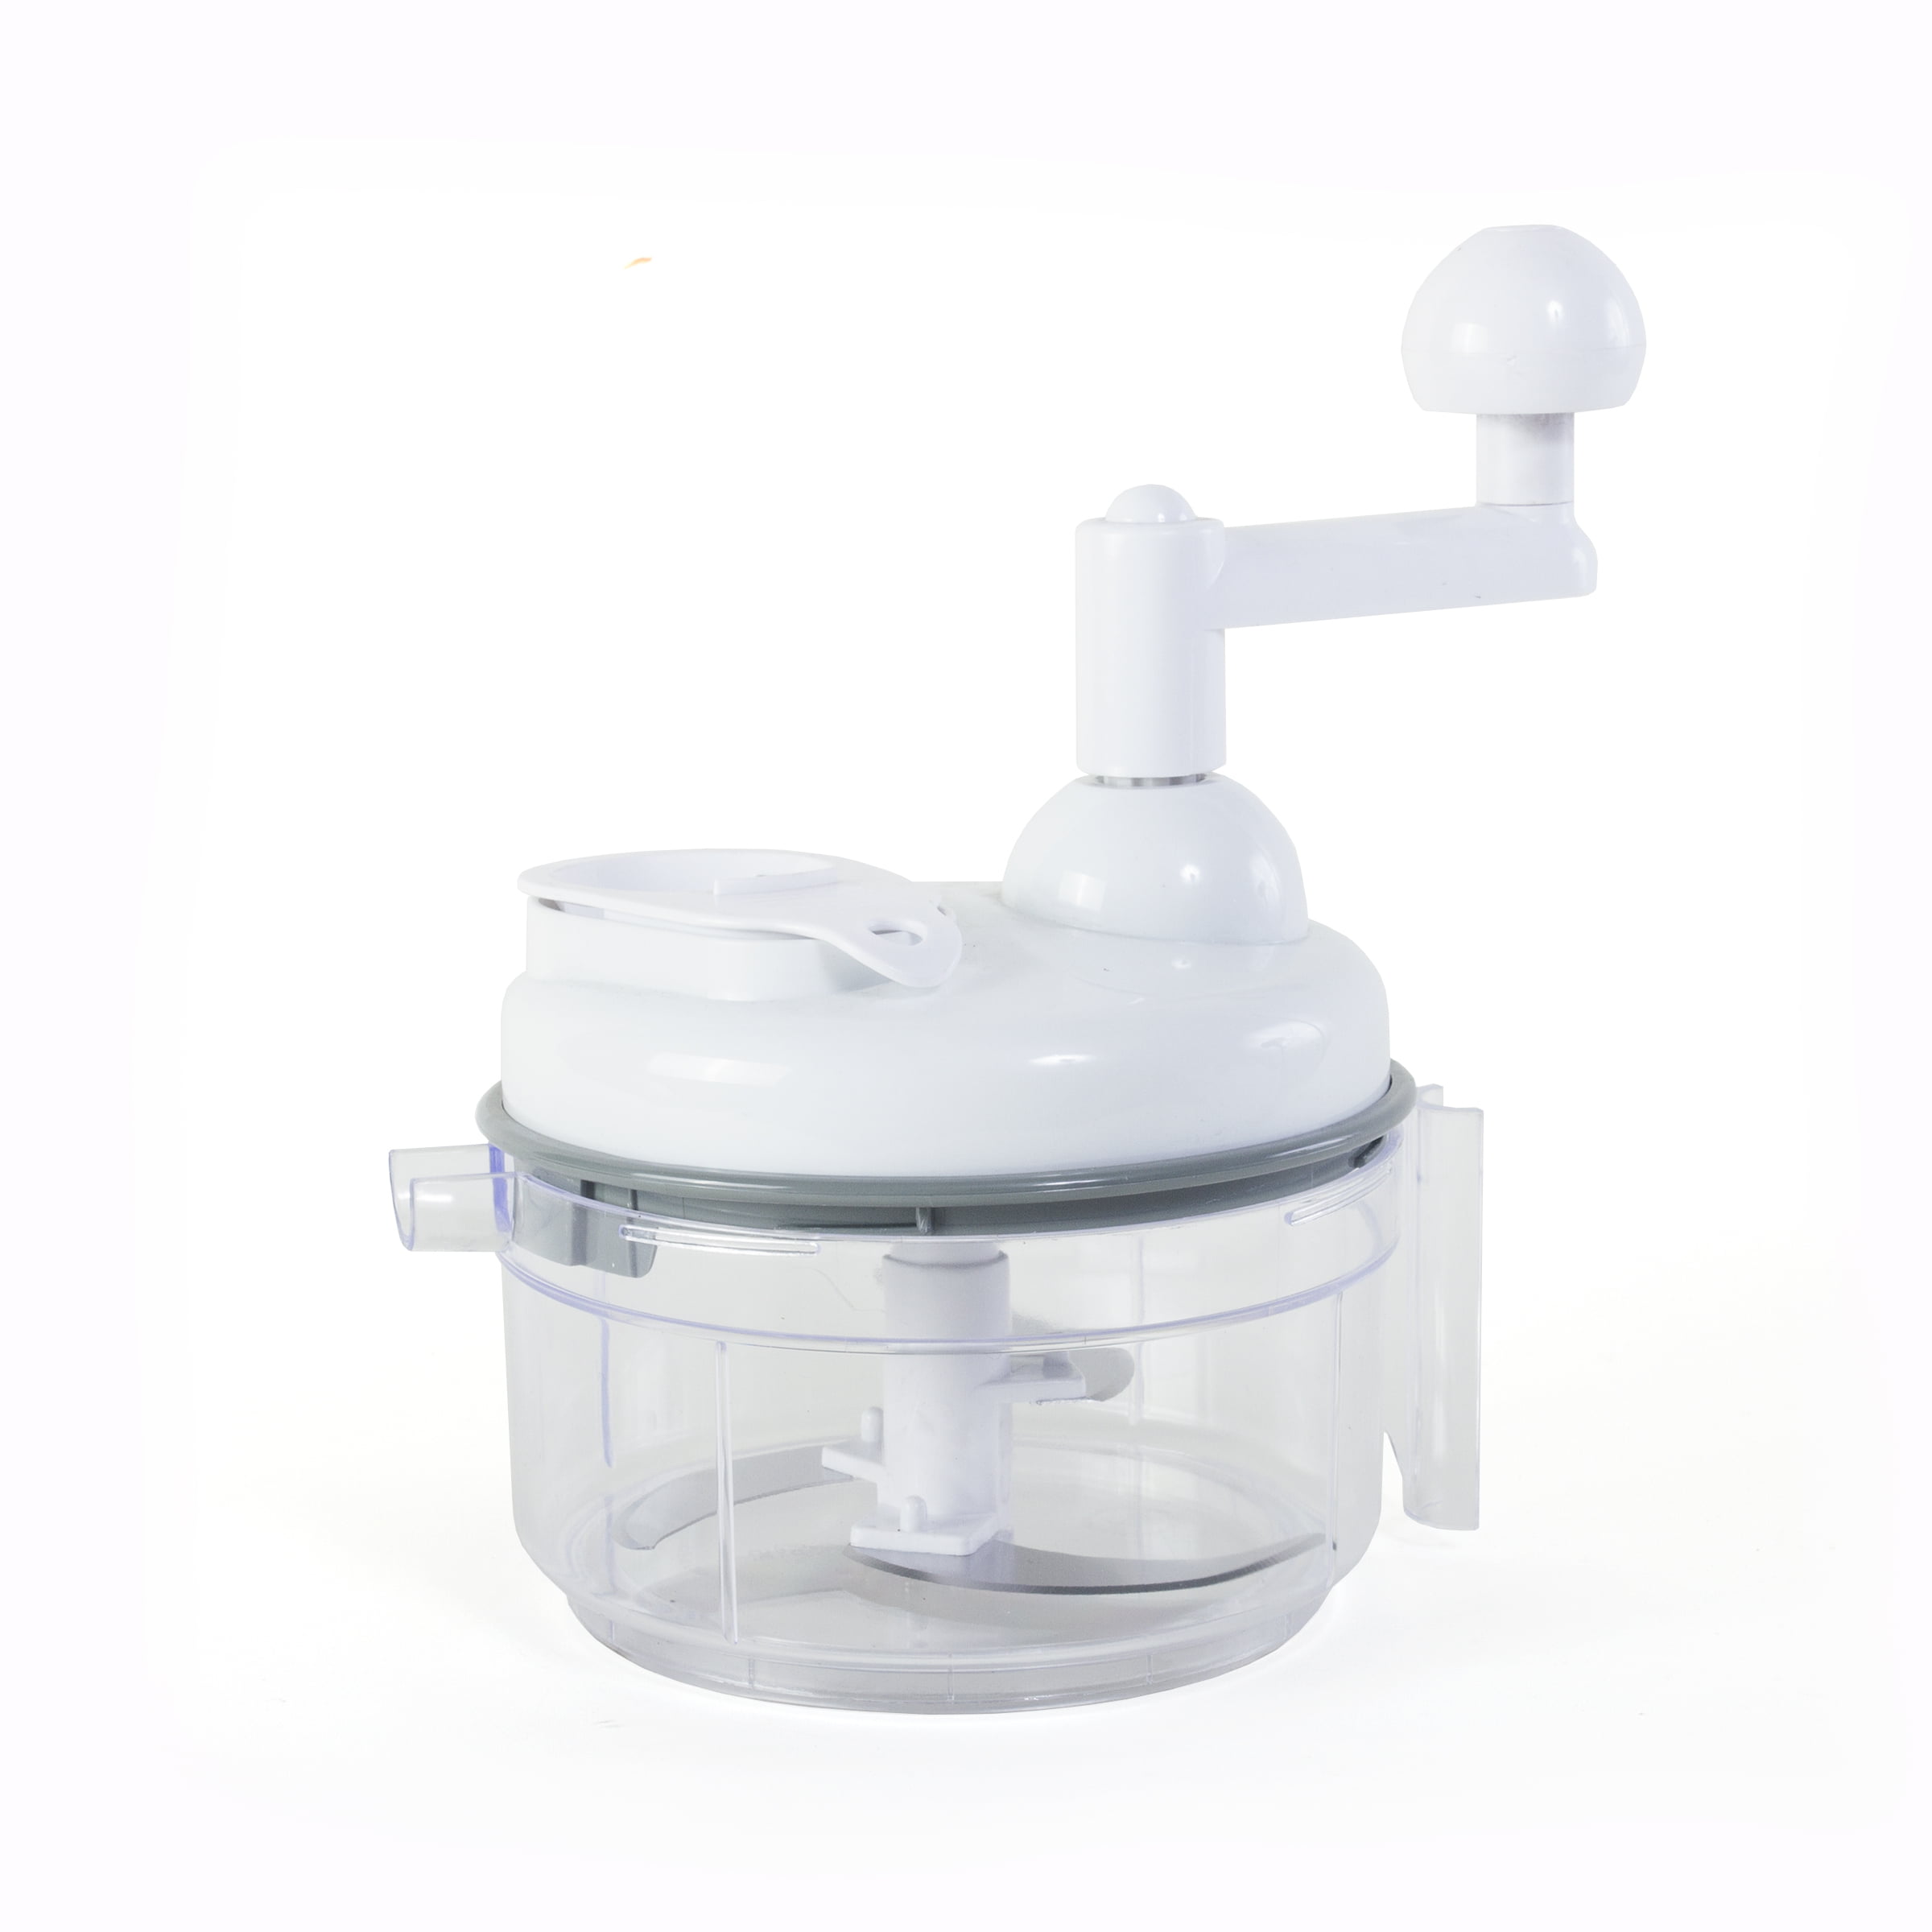 NEW Food Processor FOOD CHOPPER.GREAT FOR SALSA MAKING. By Pampered Chef  Manual